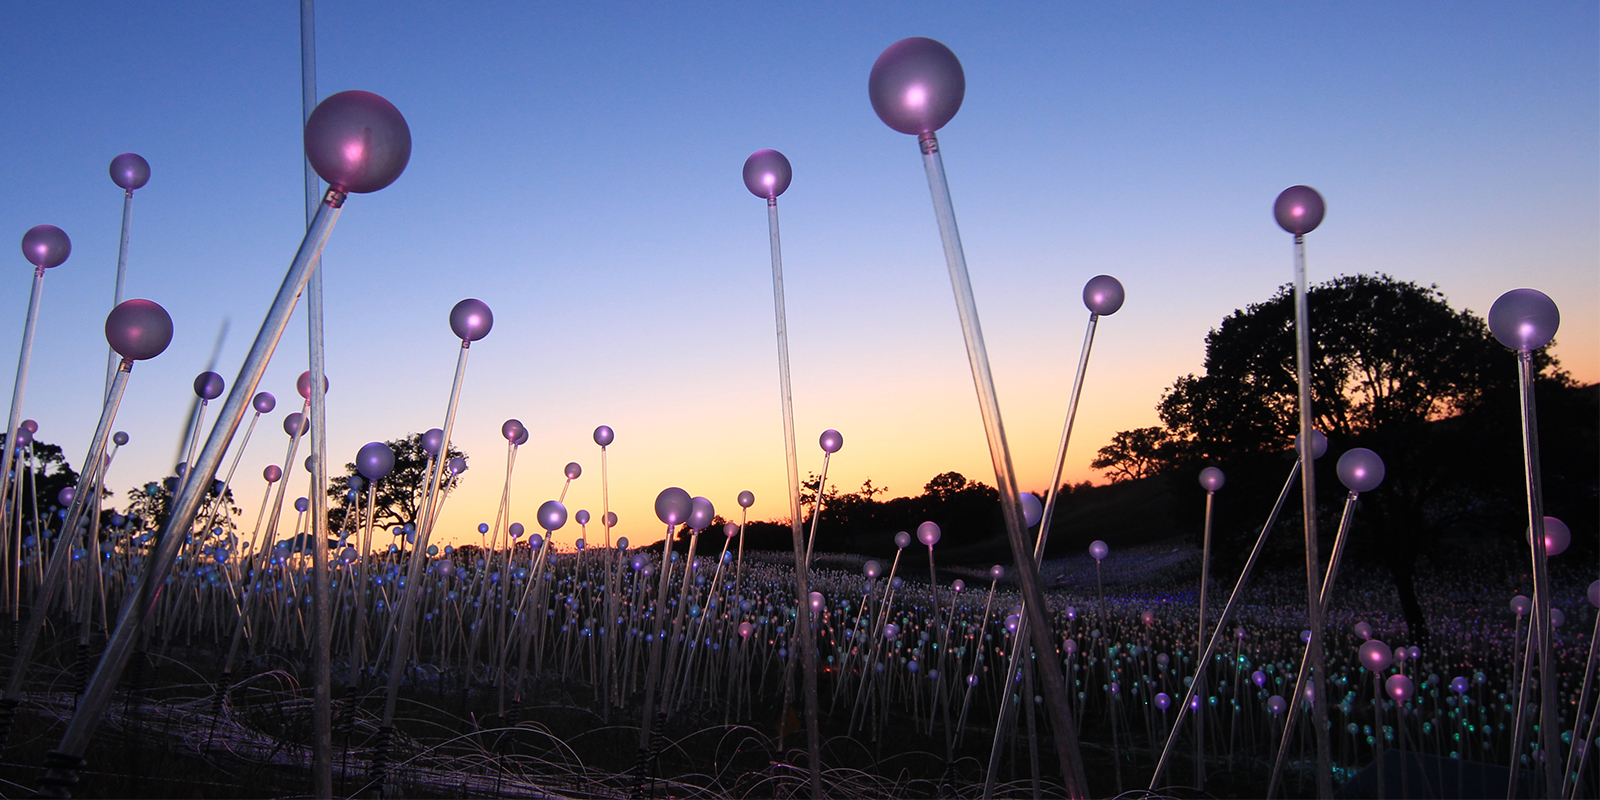 video of light installations by bruce munro